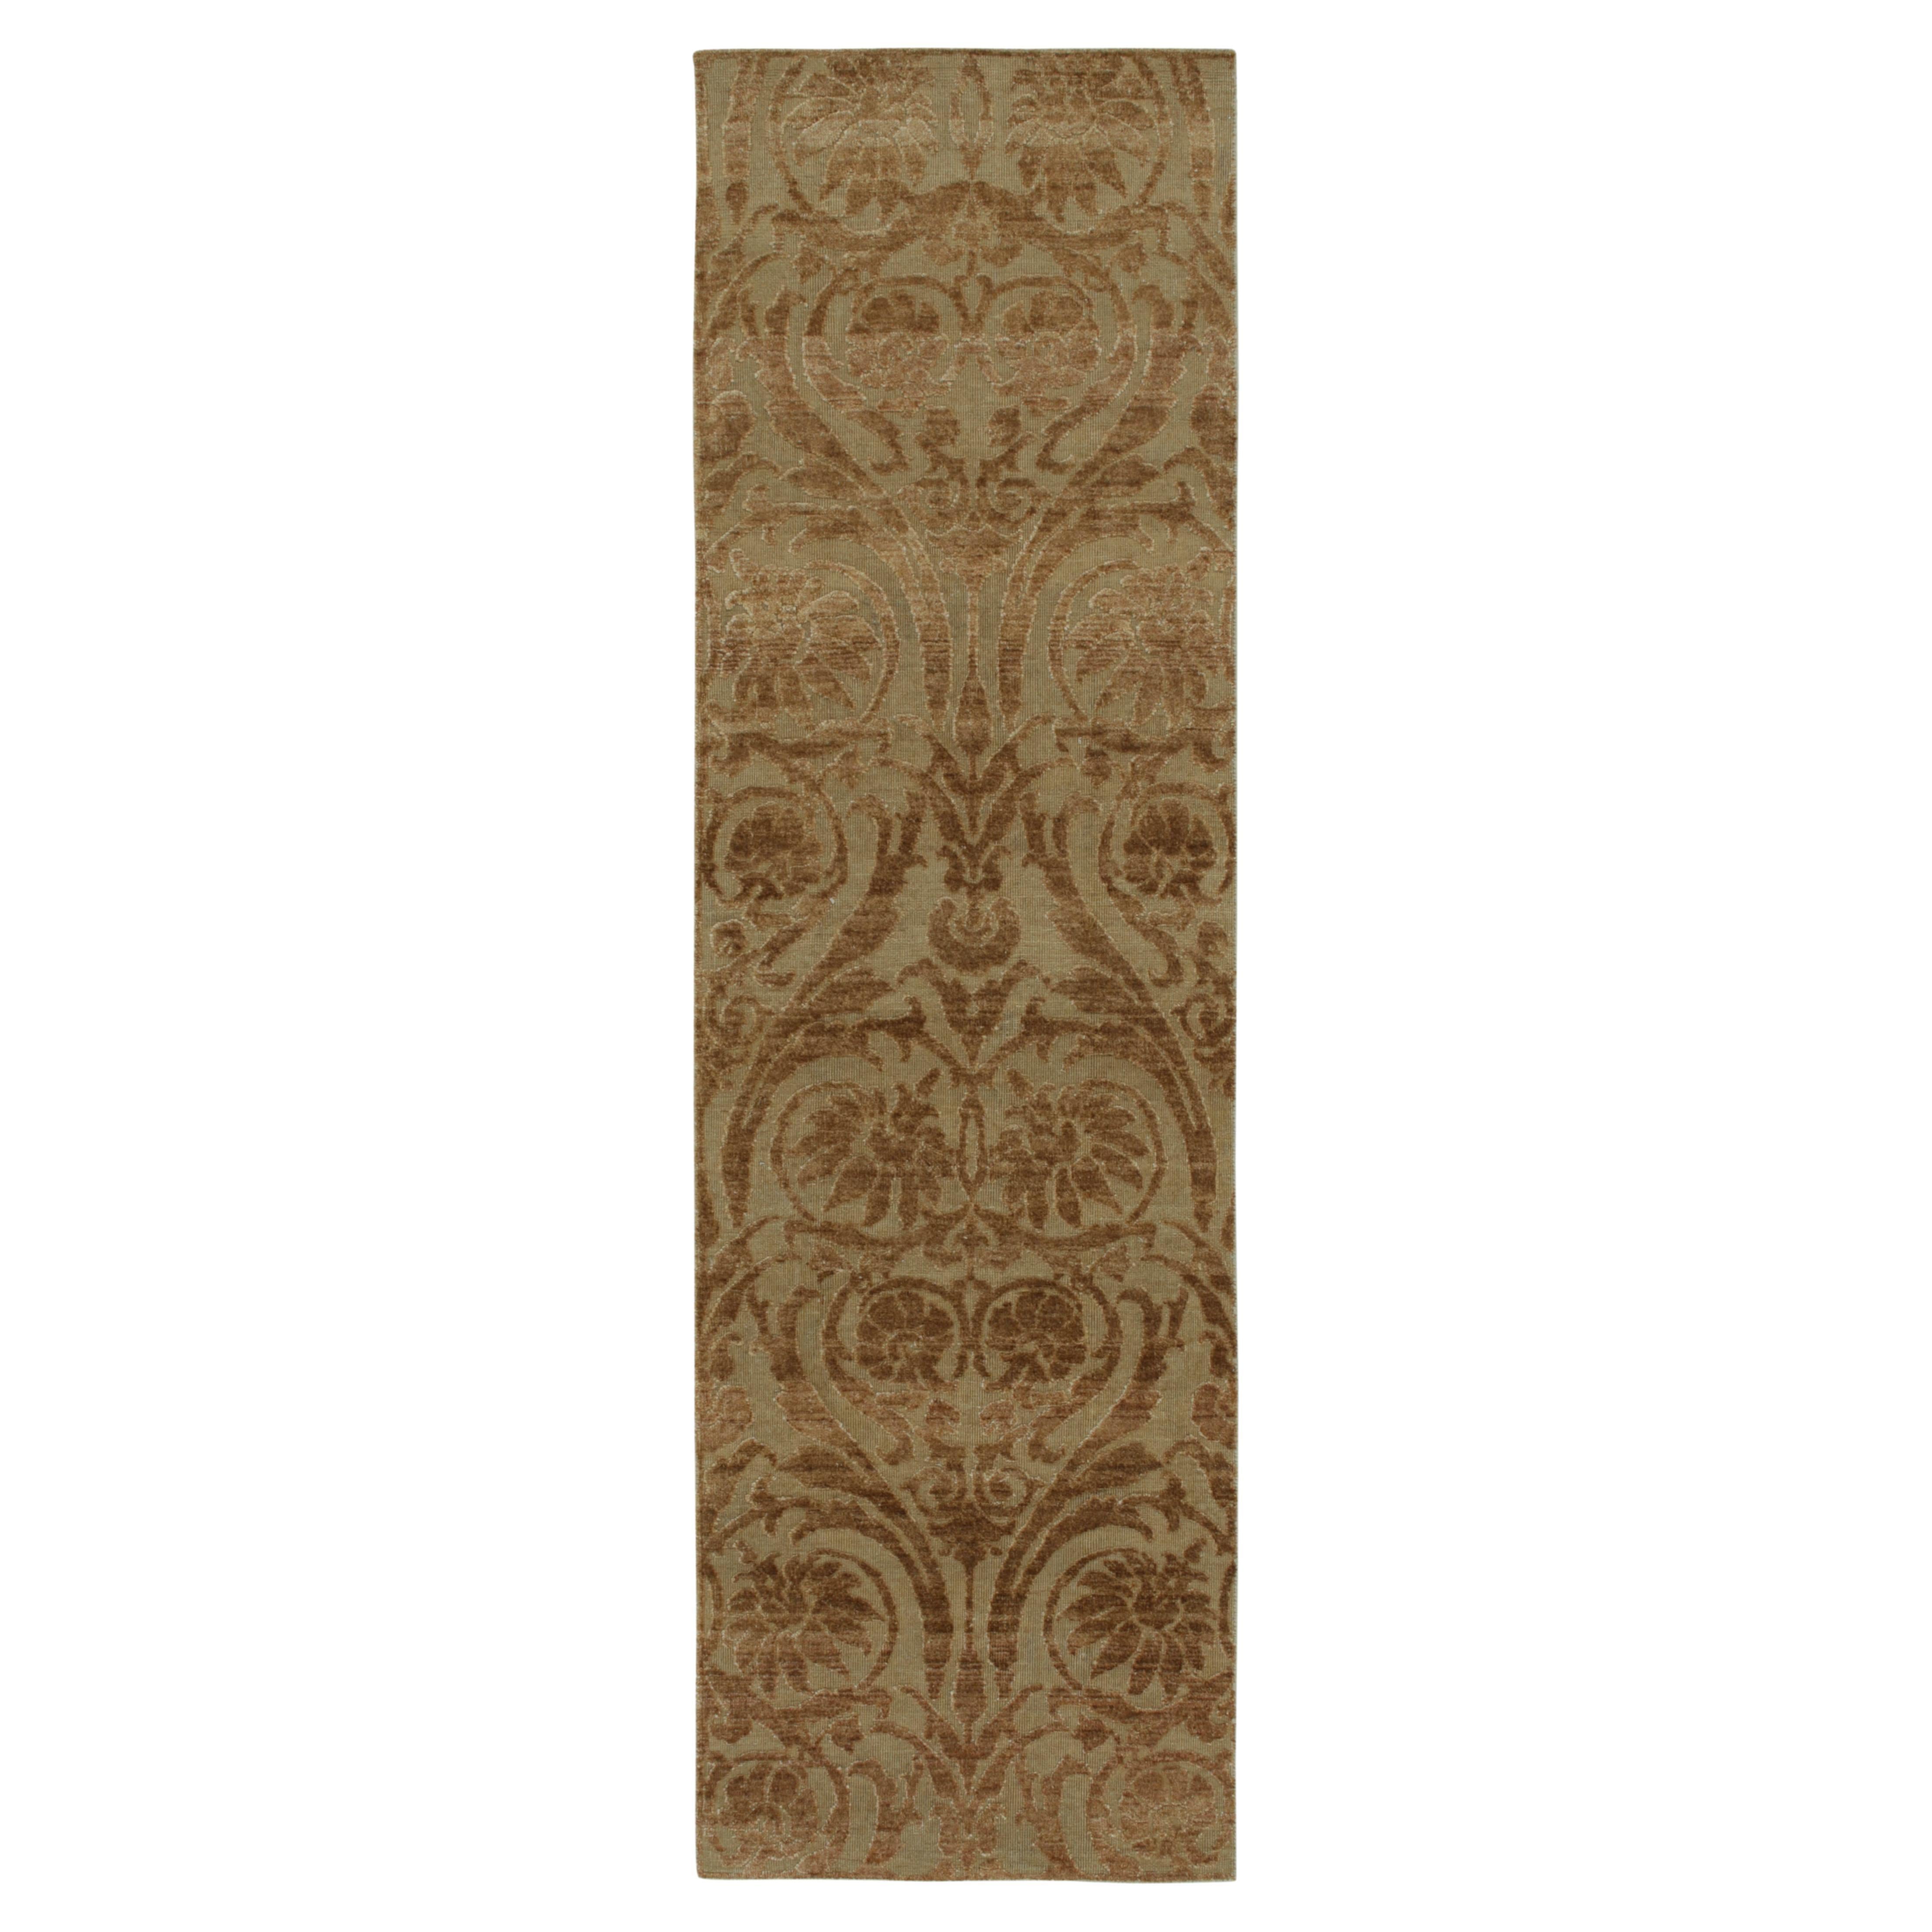 Rug & Kilim’s European Style Runner in Beige with Brown Floral Patterns For Sale